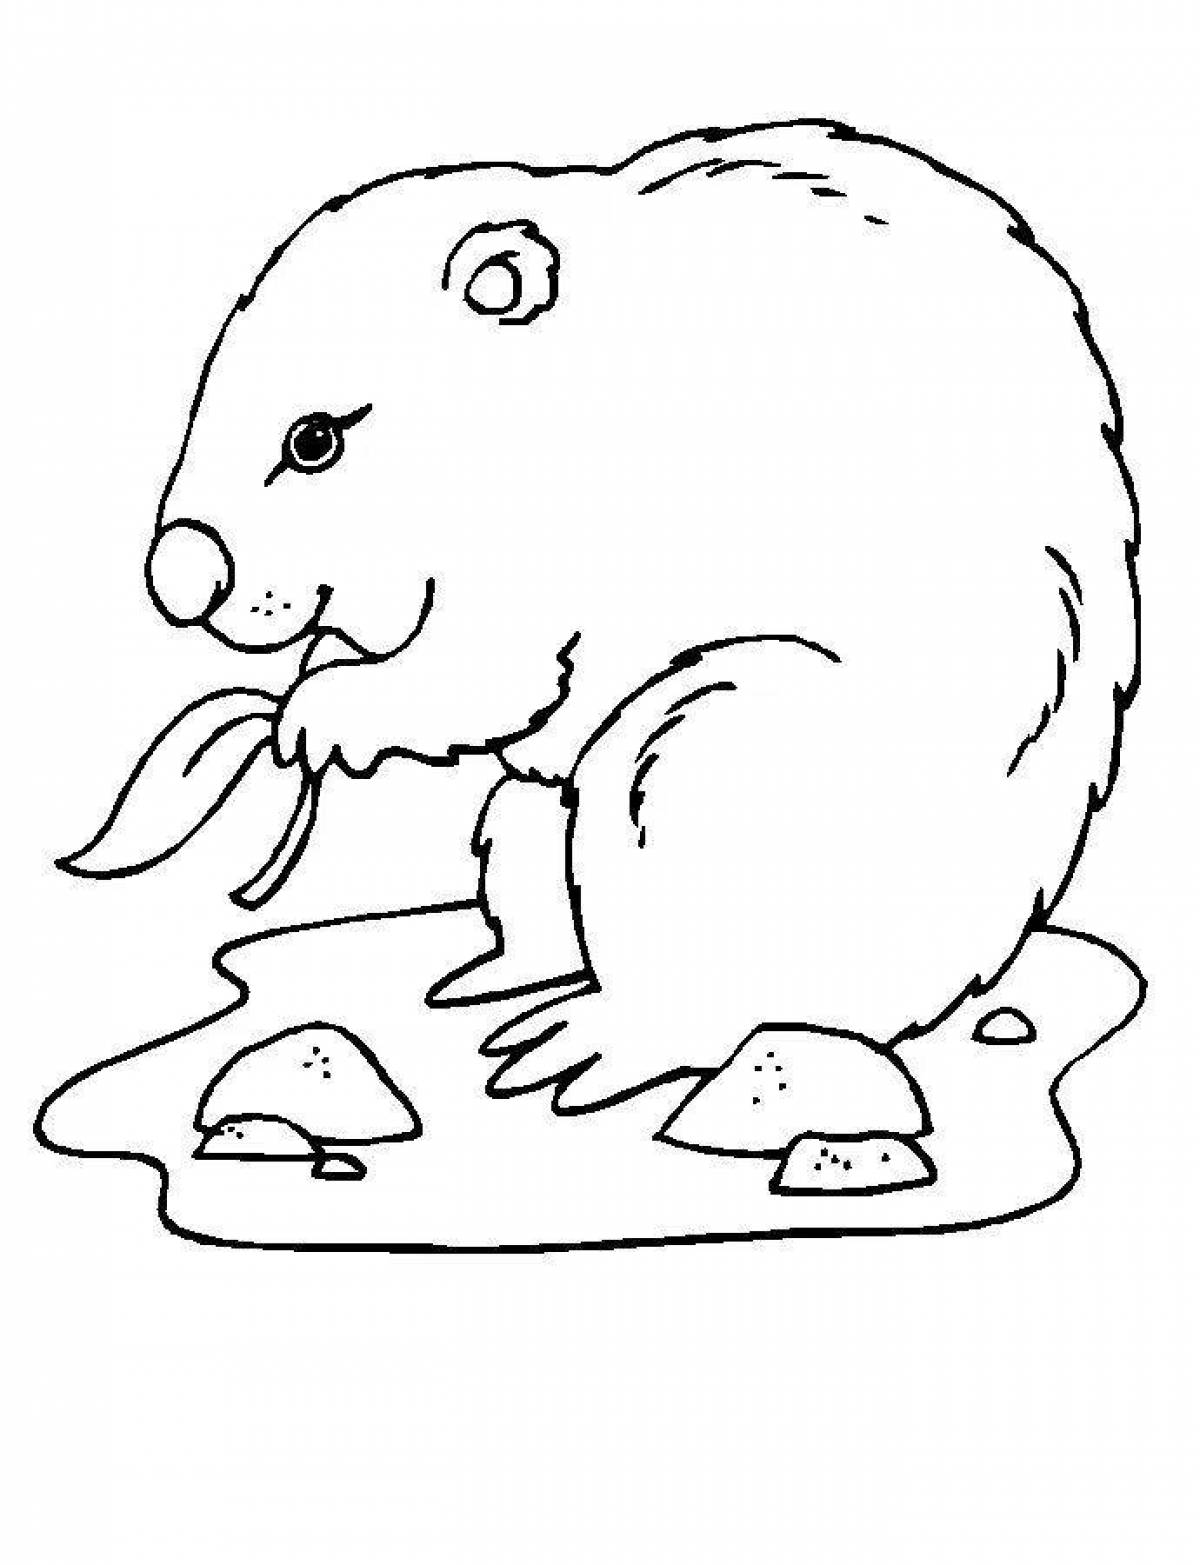 Glamour marmot coloring page